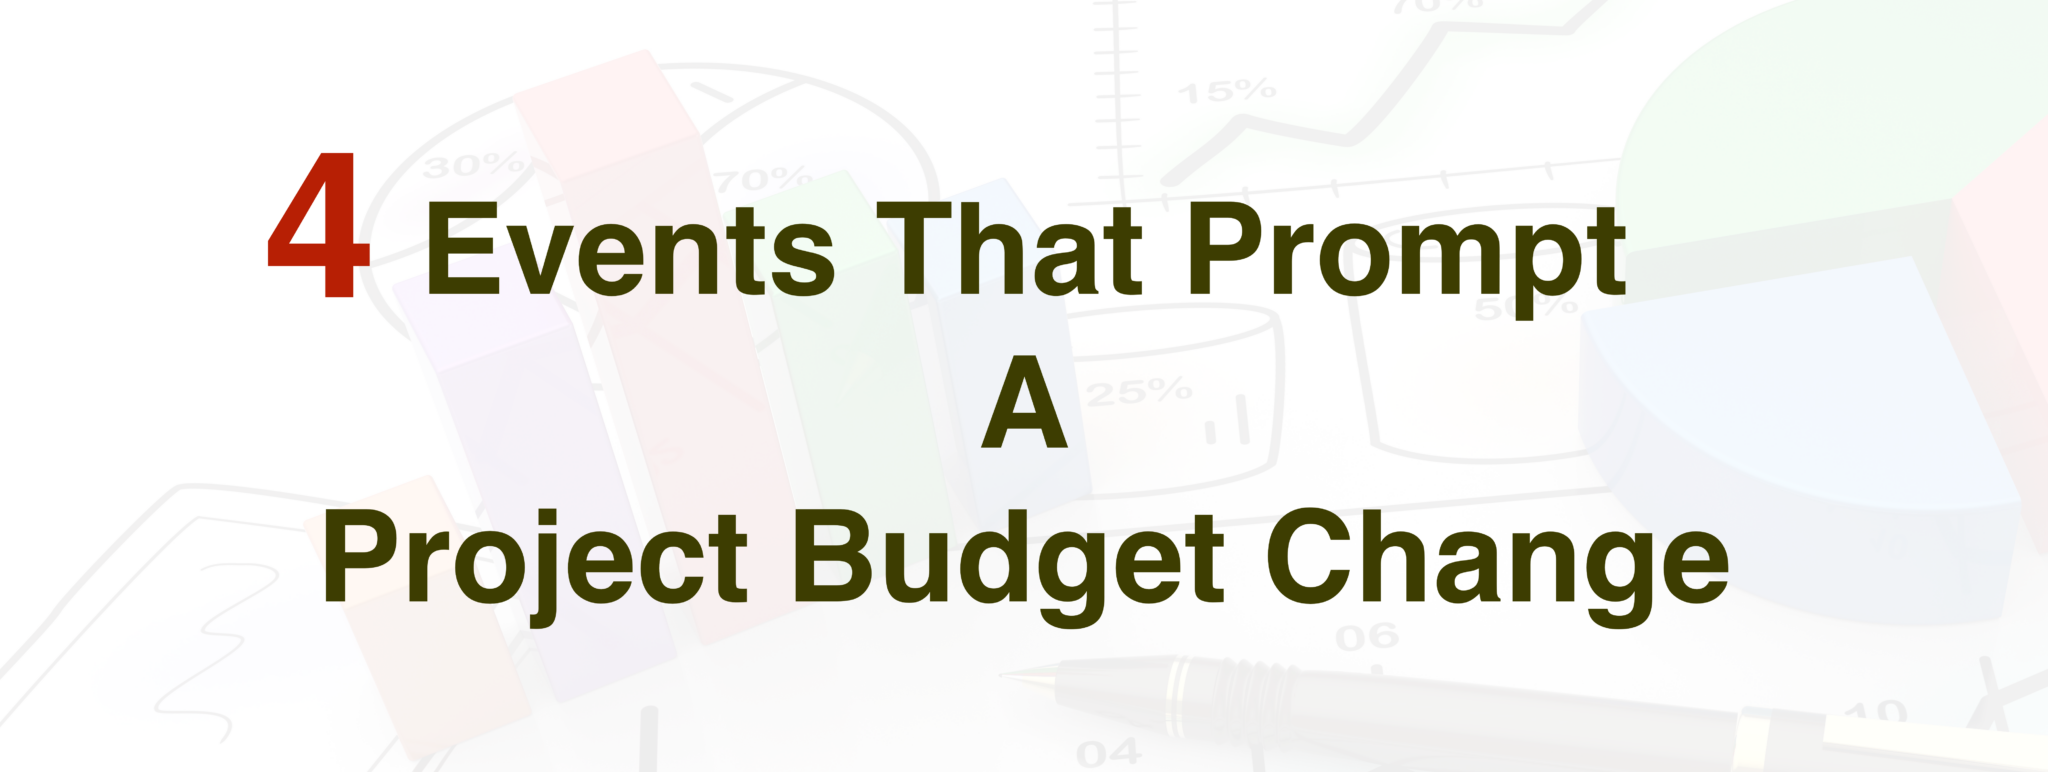 Events That Prompt A Project Budget Change